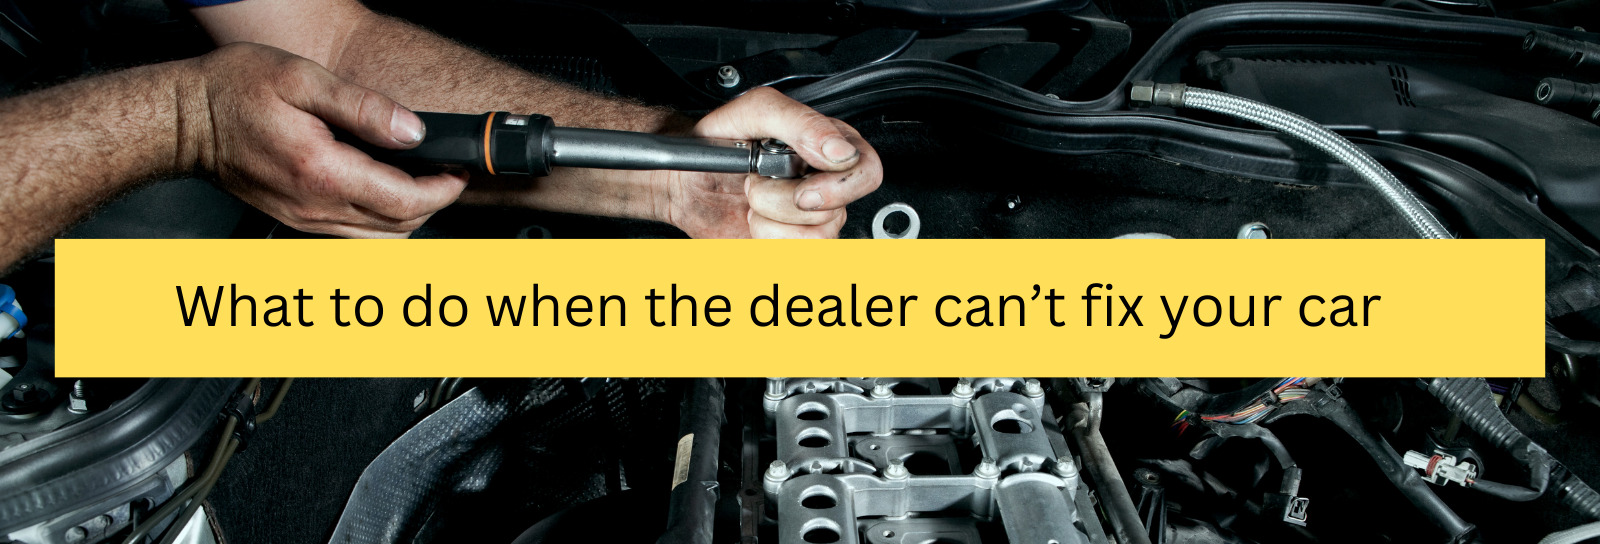 What to Do When the Dealer Can’t Fix Your Car: A Guide for Frustrated Consumers